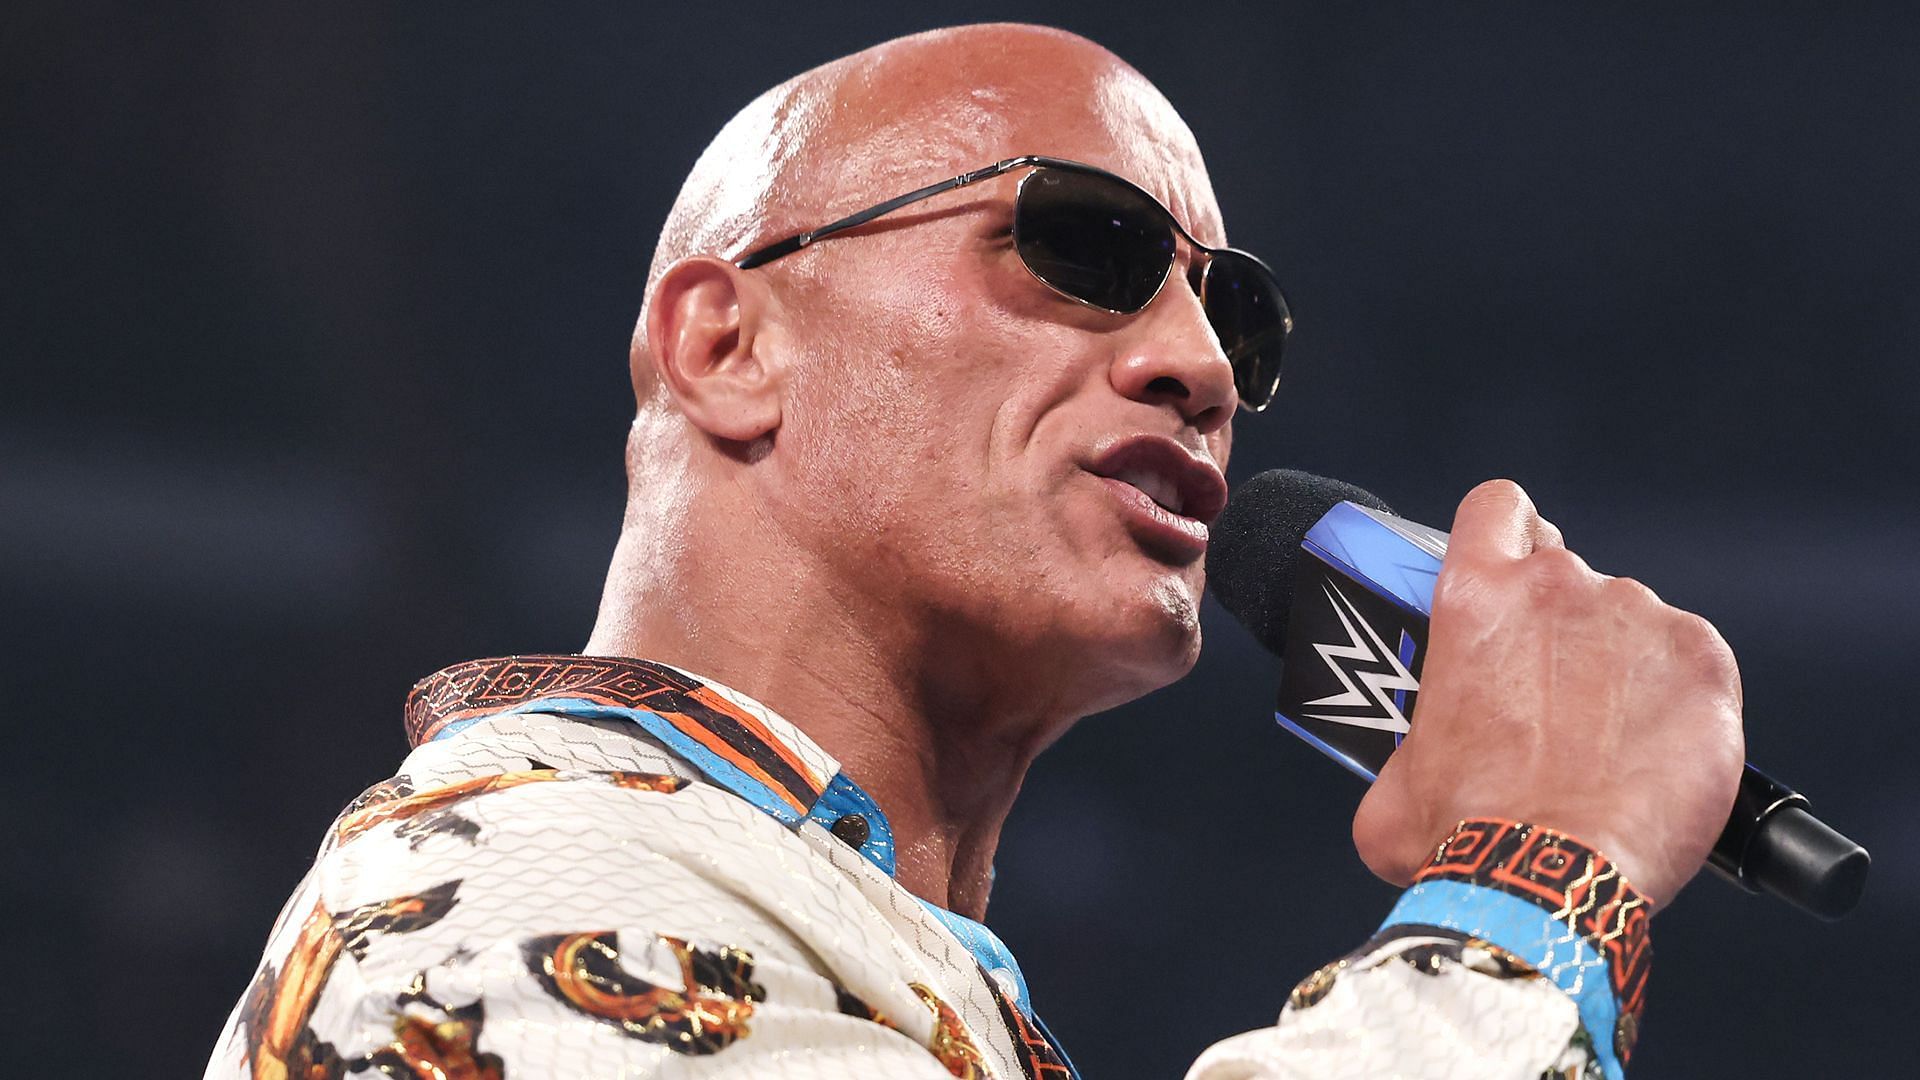 The Rock has been cooking his opponents since his return (Image via WWE.com)